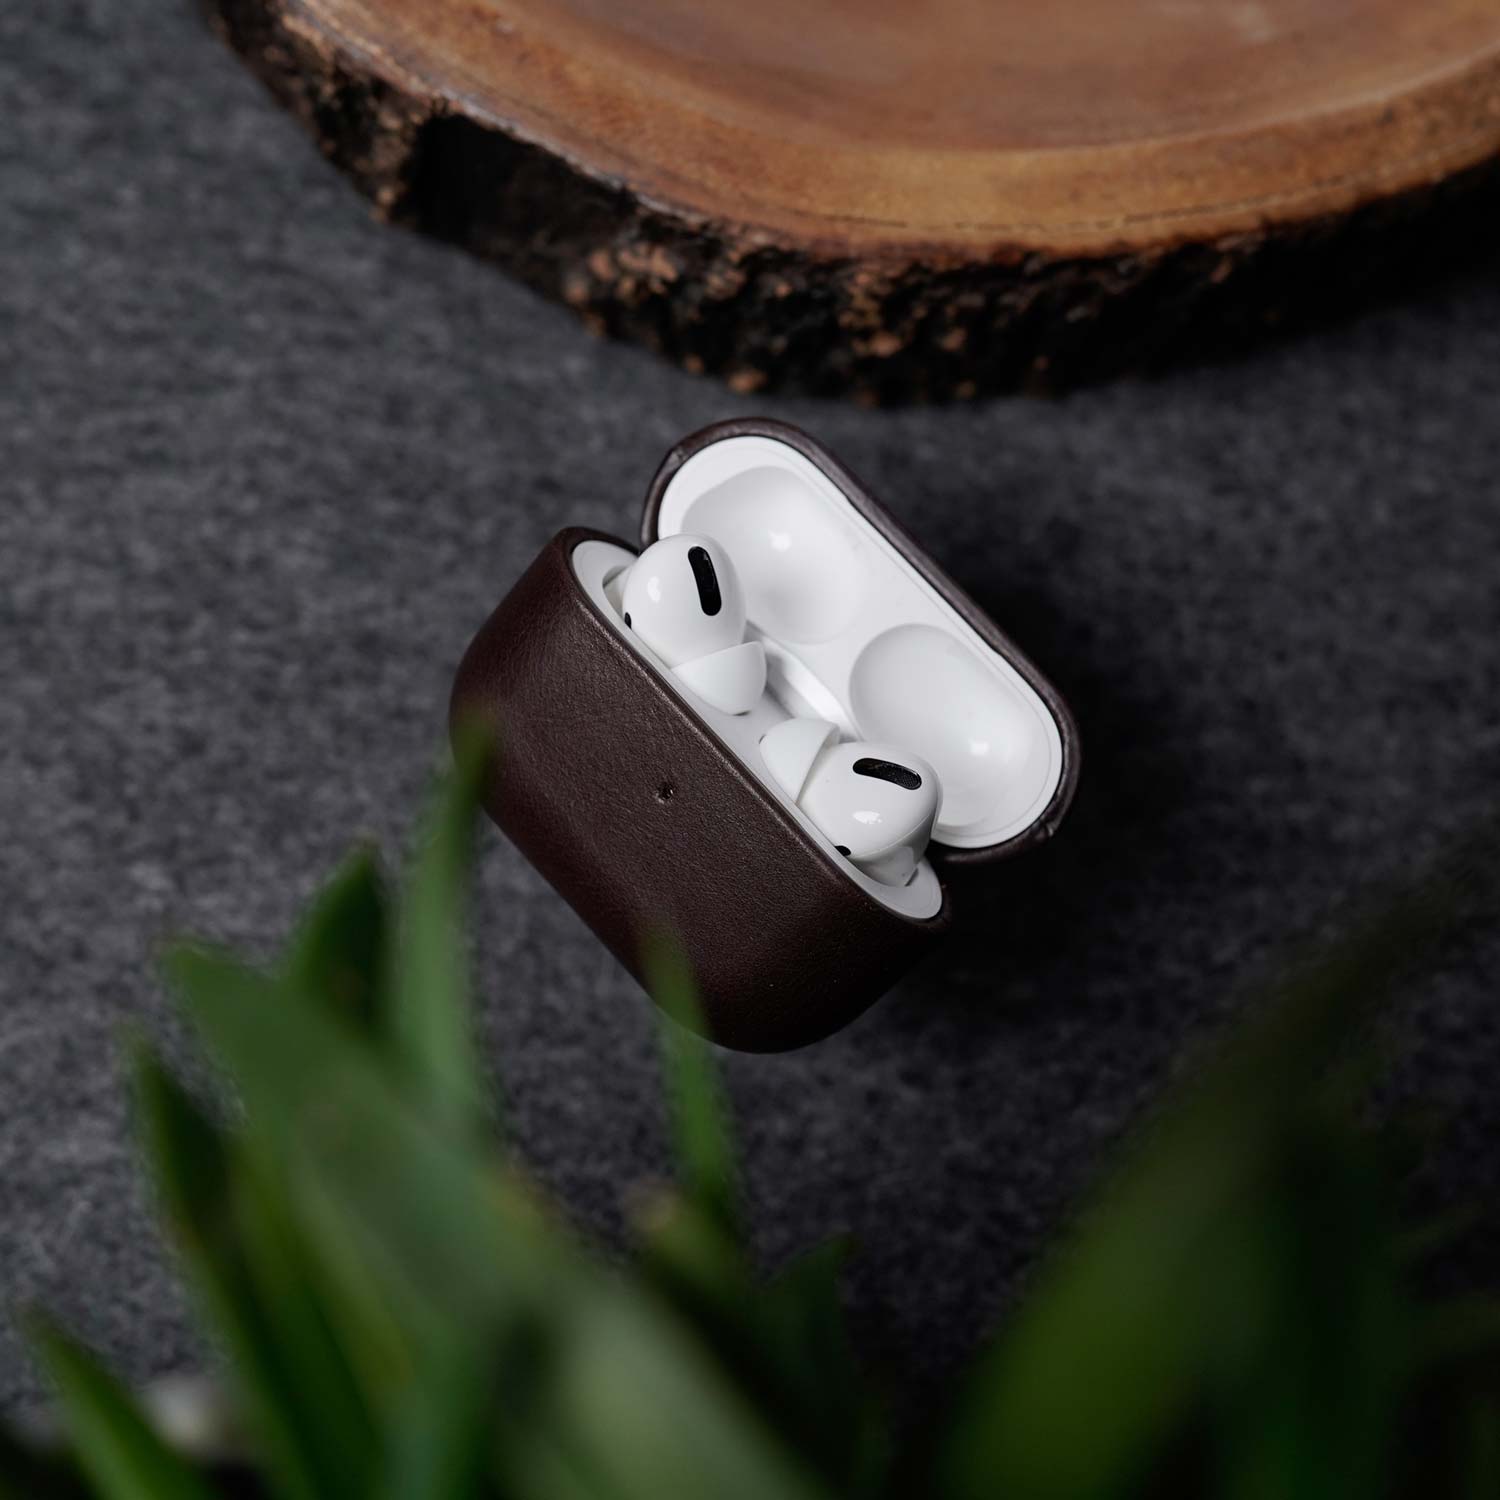 Designer Brown Leather AirPods Pro Case - Fast Delivery - iPhonecaseUK